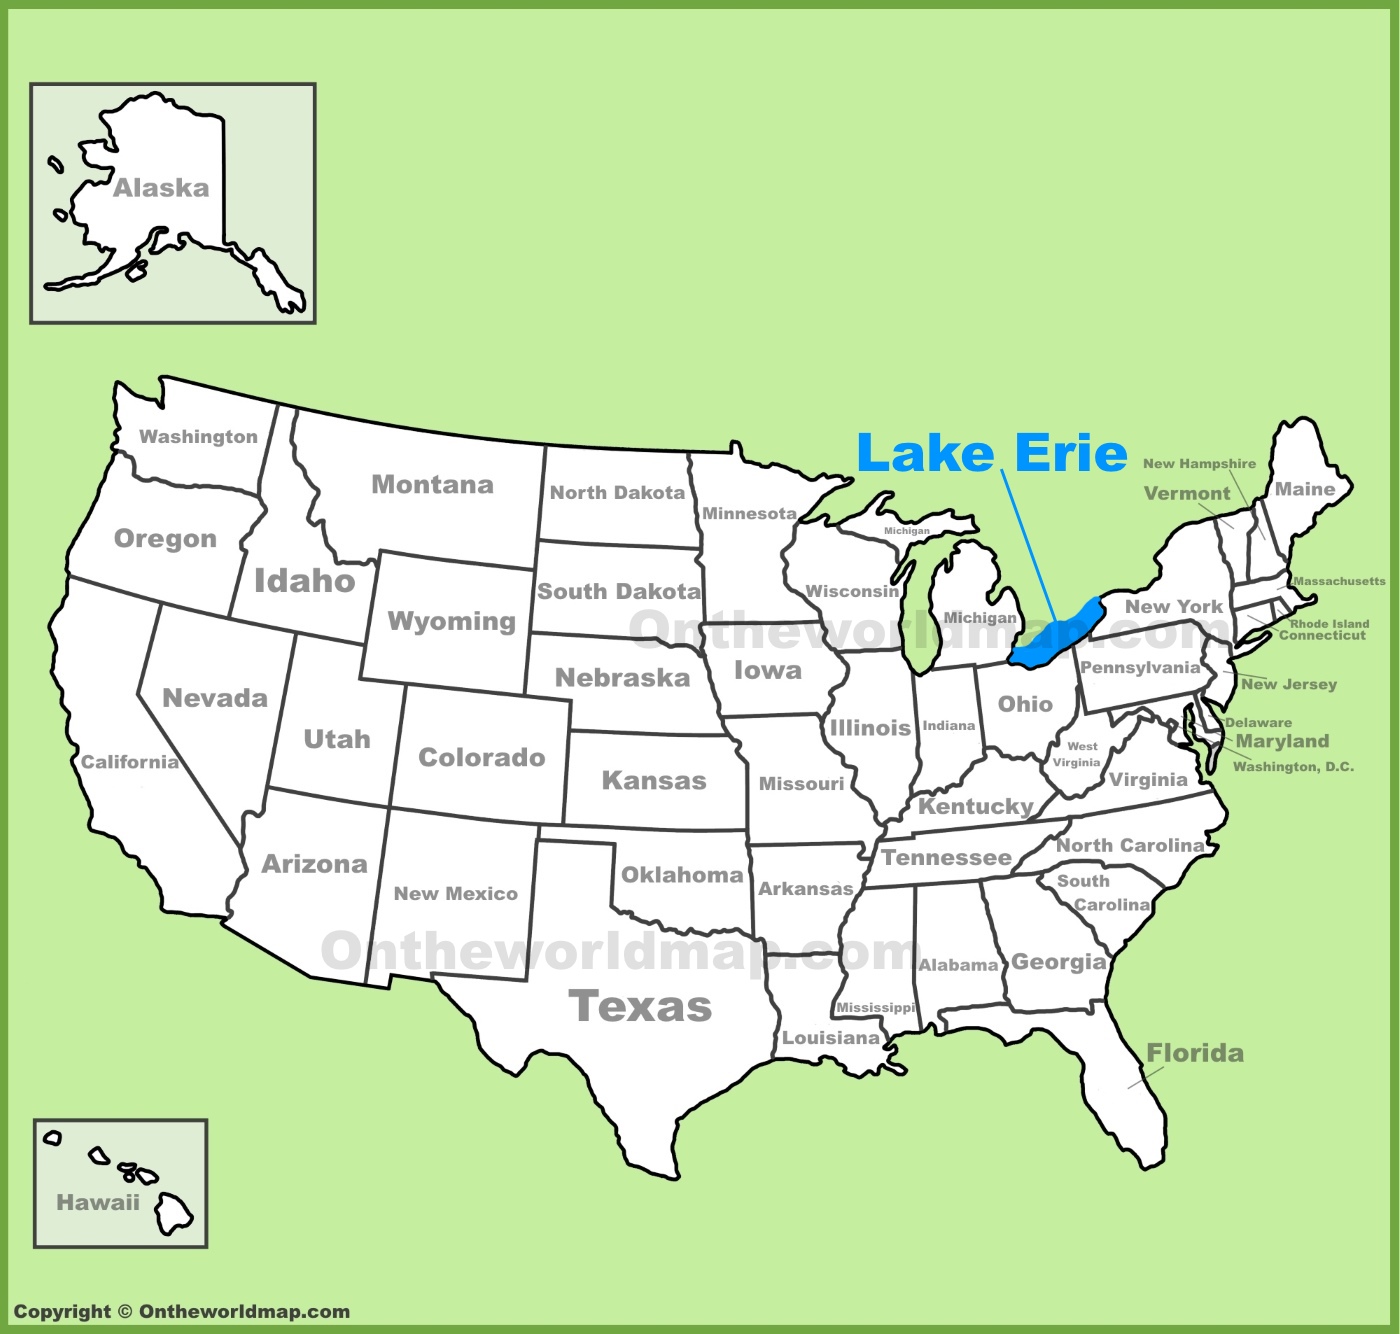 lake erie on us map Lake Erie Location On The U S Map lake erie on us map